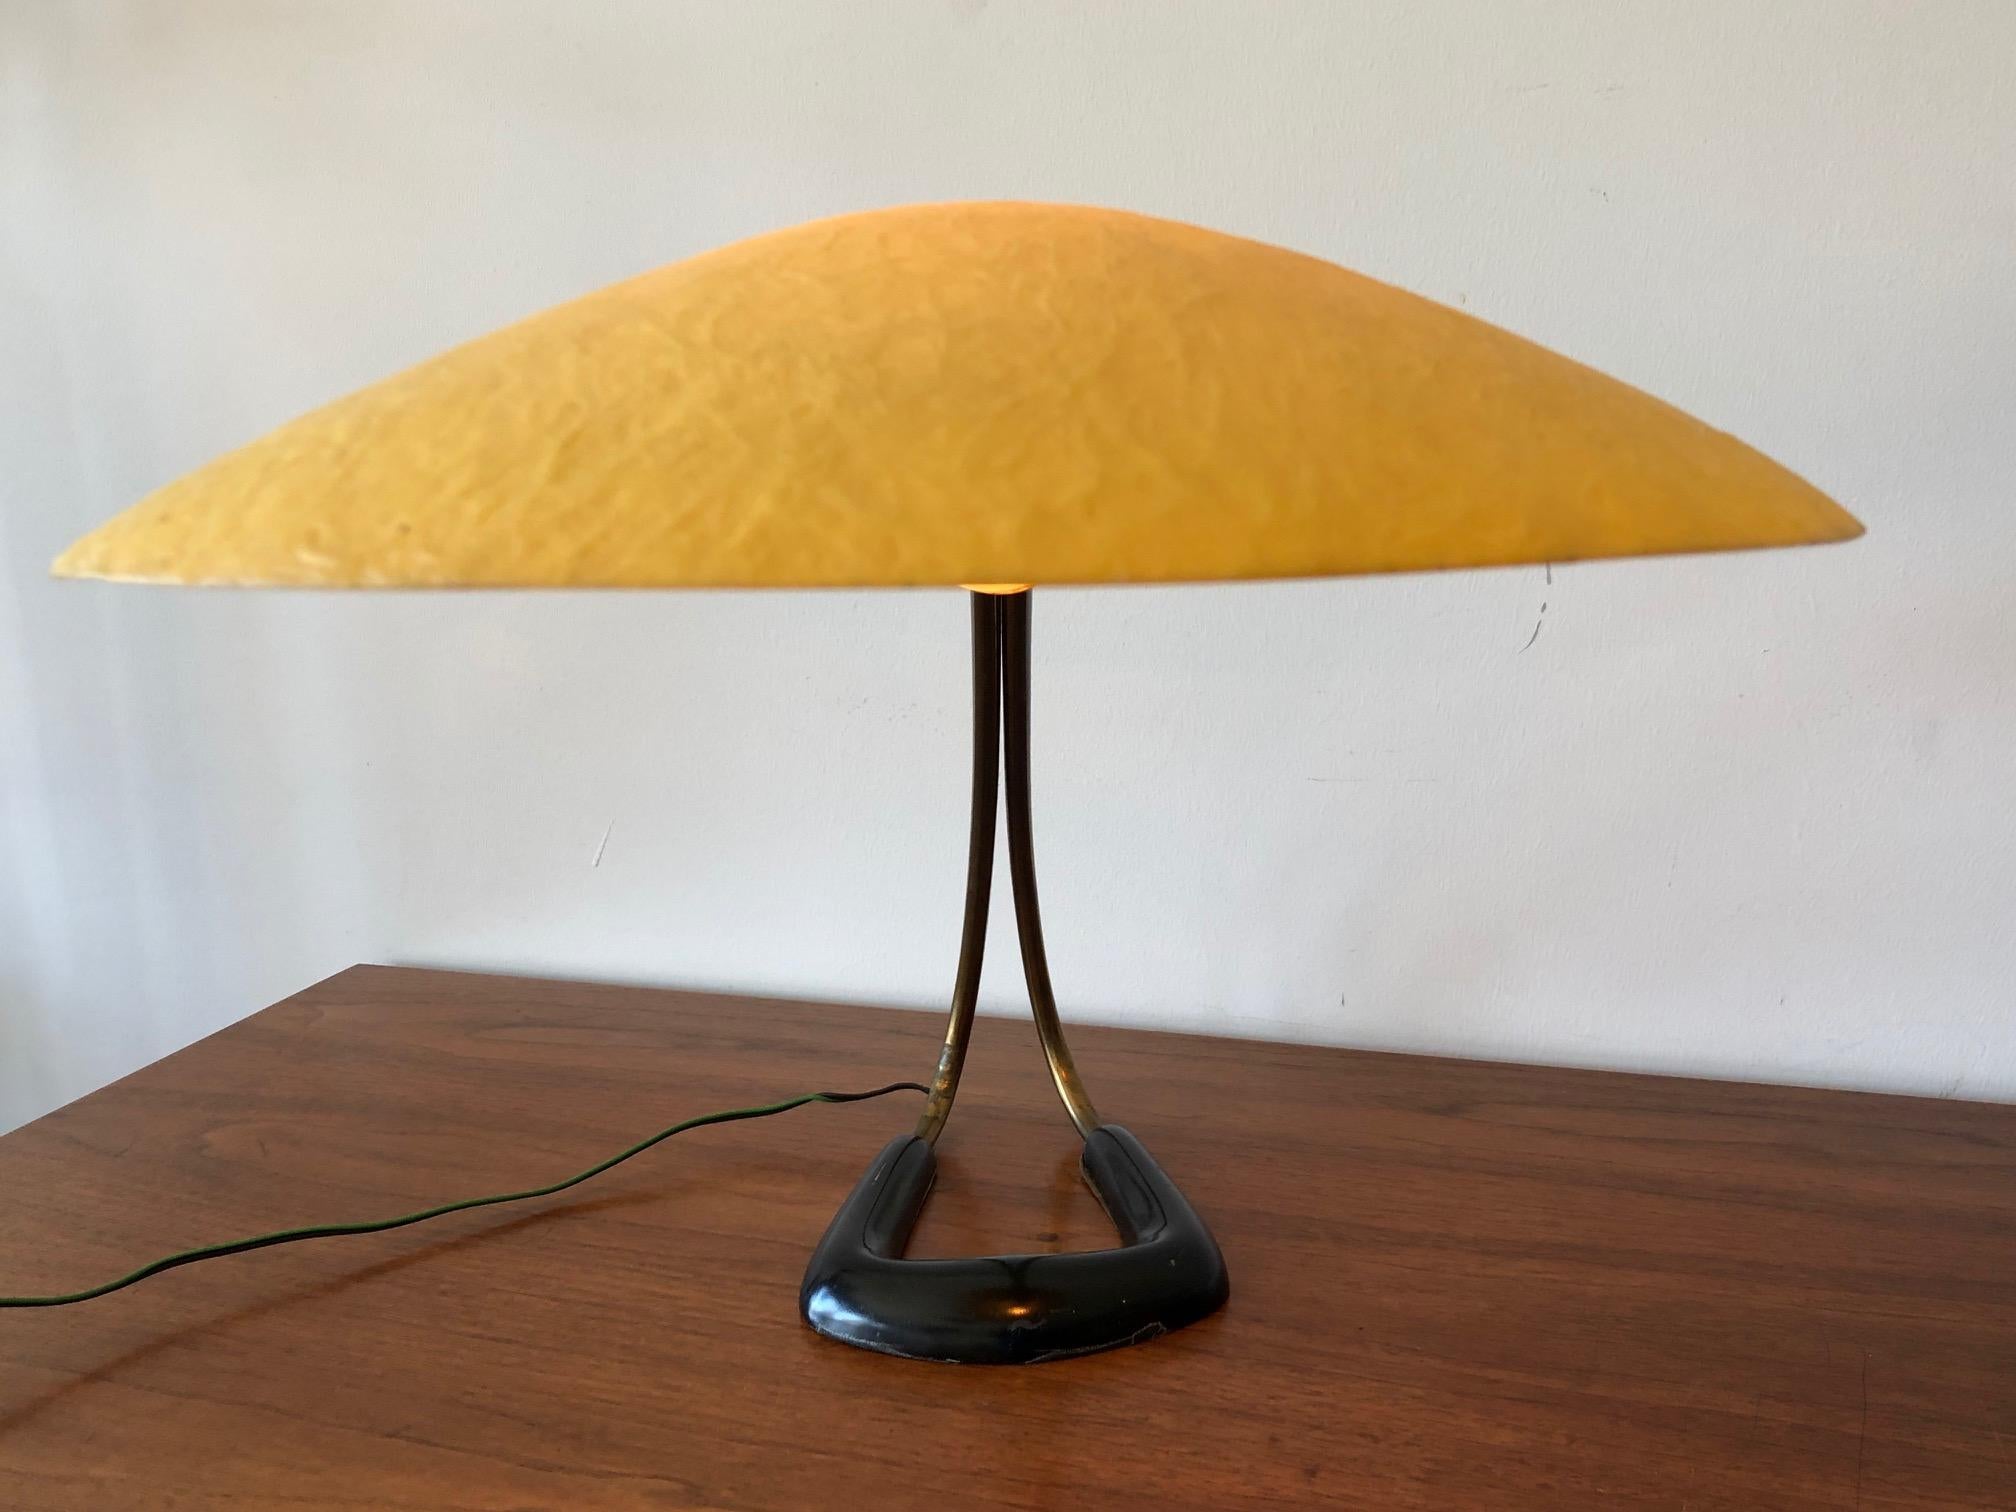  Table Lamp with Fiberglass Shade In Good Condition For Sale In St.Petersburg, FL